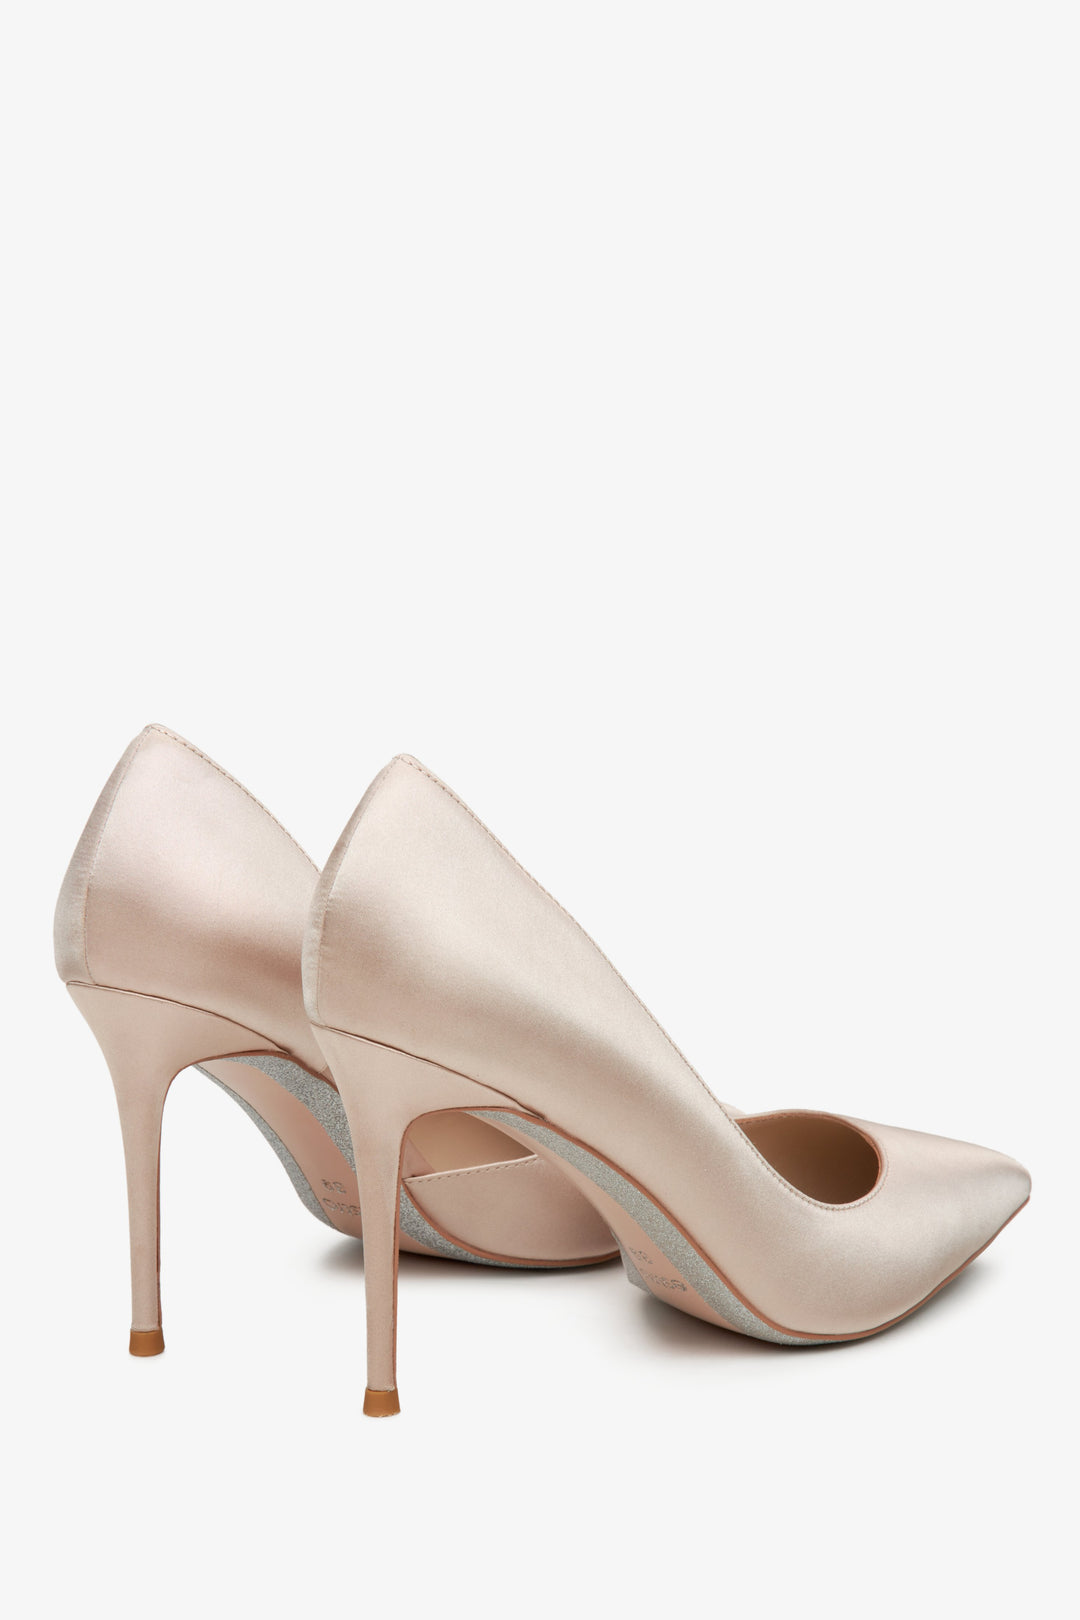 Women's powder pink Estro high heels with satin finish - close-up on the heel.